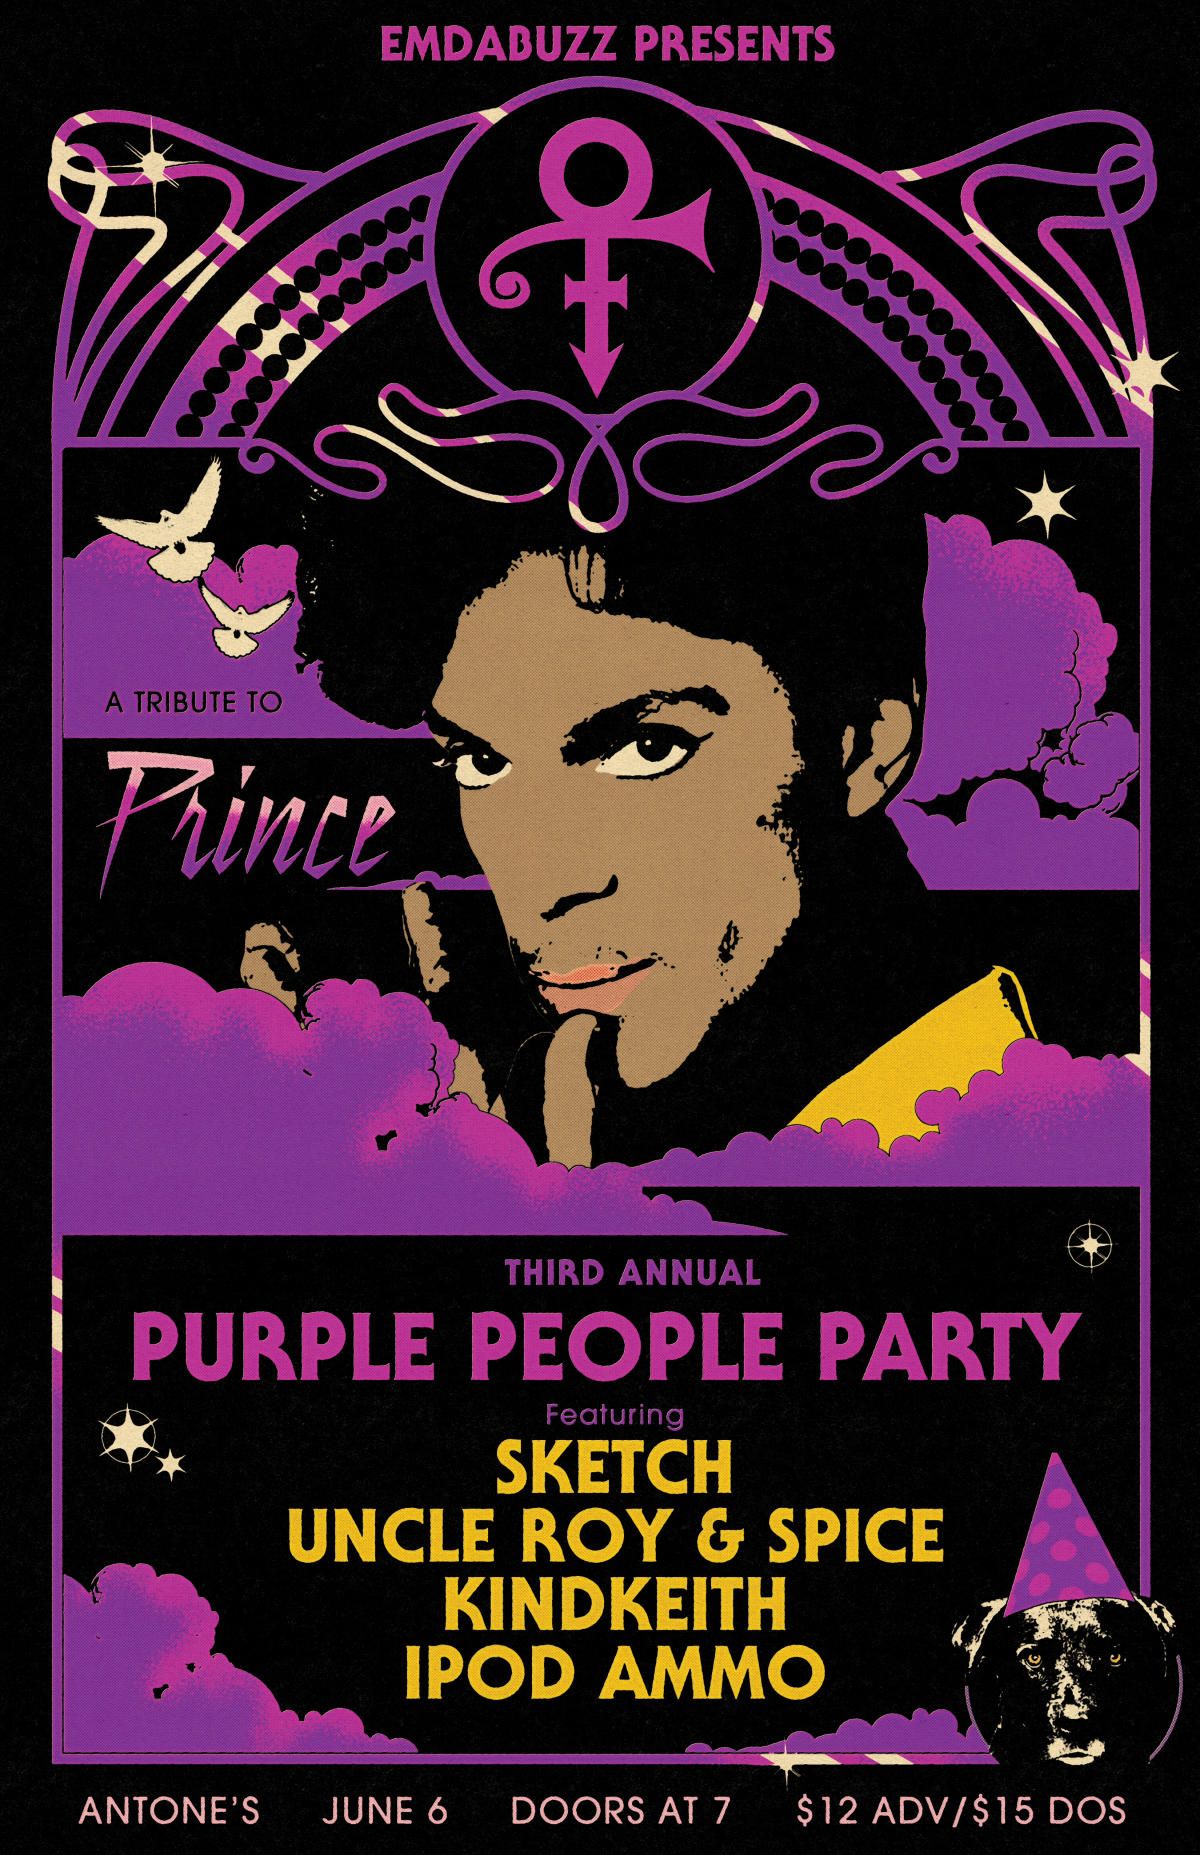 Purple People Party - A Tribute to Prince